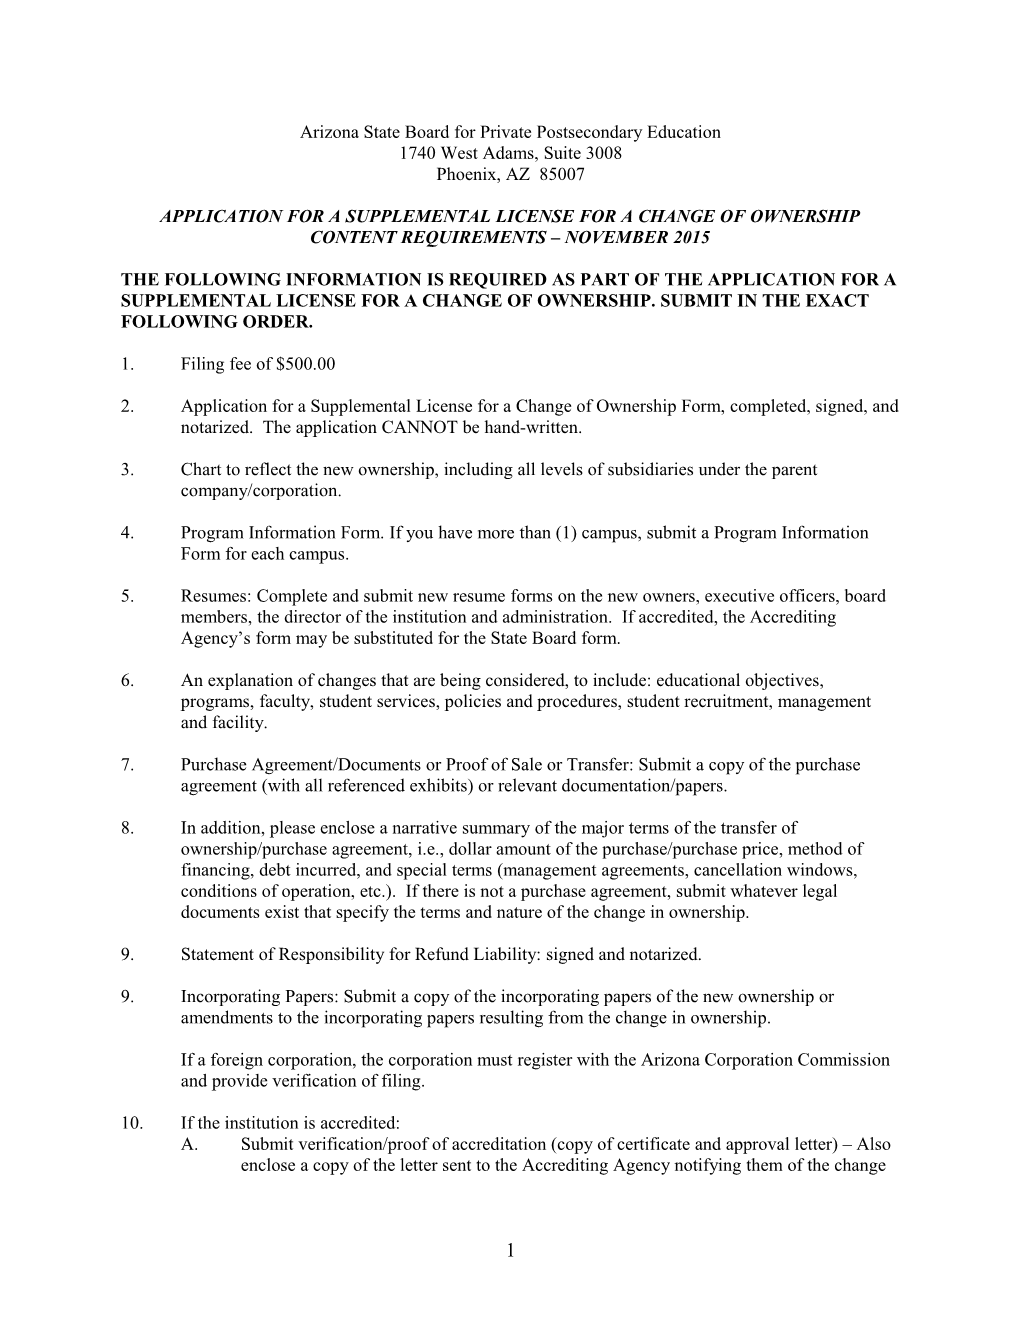 Arizona State Board for Private Postsecondary Education, 1400 West Washington, Room 260